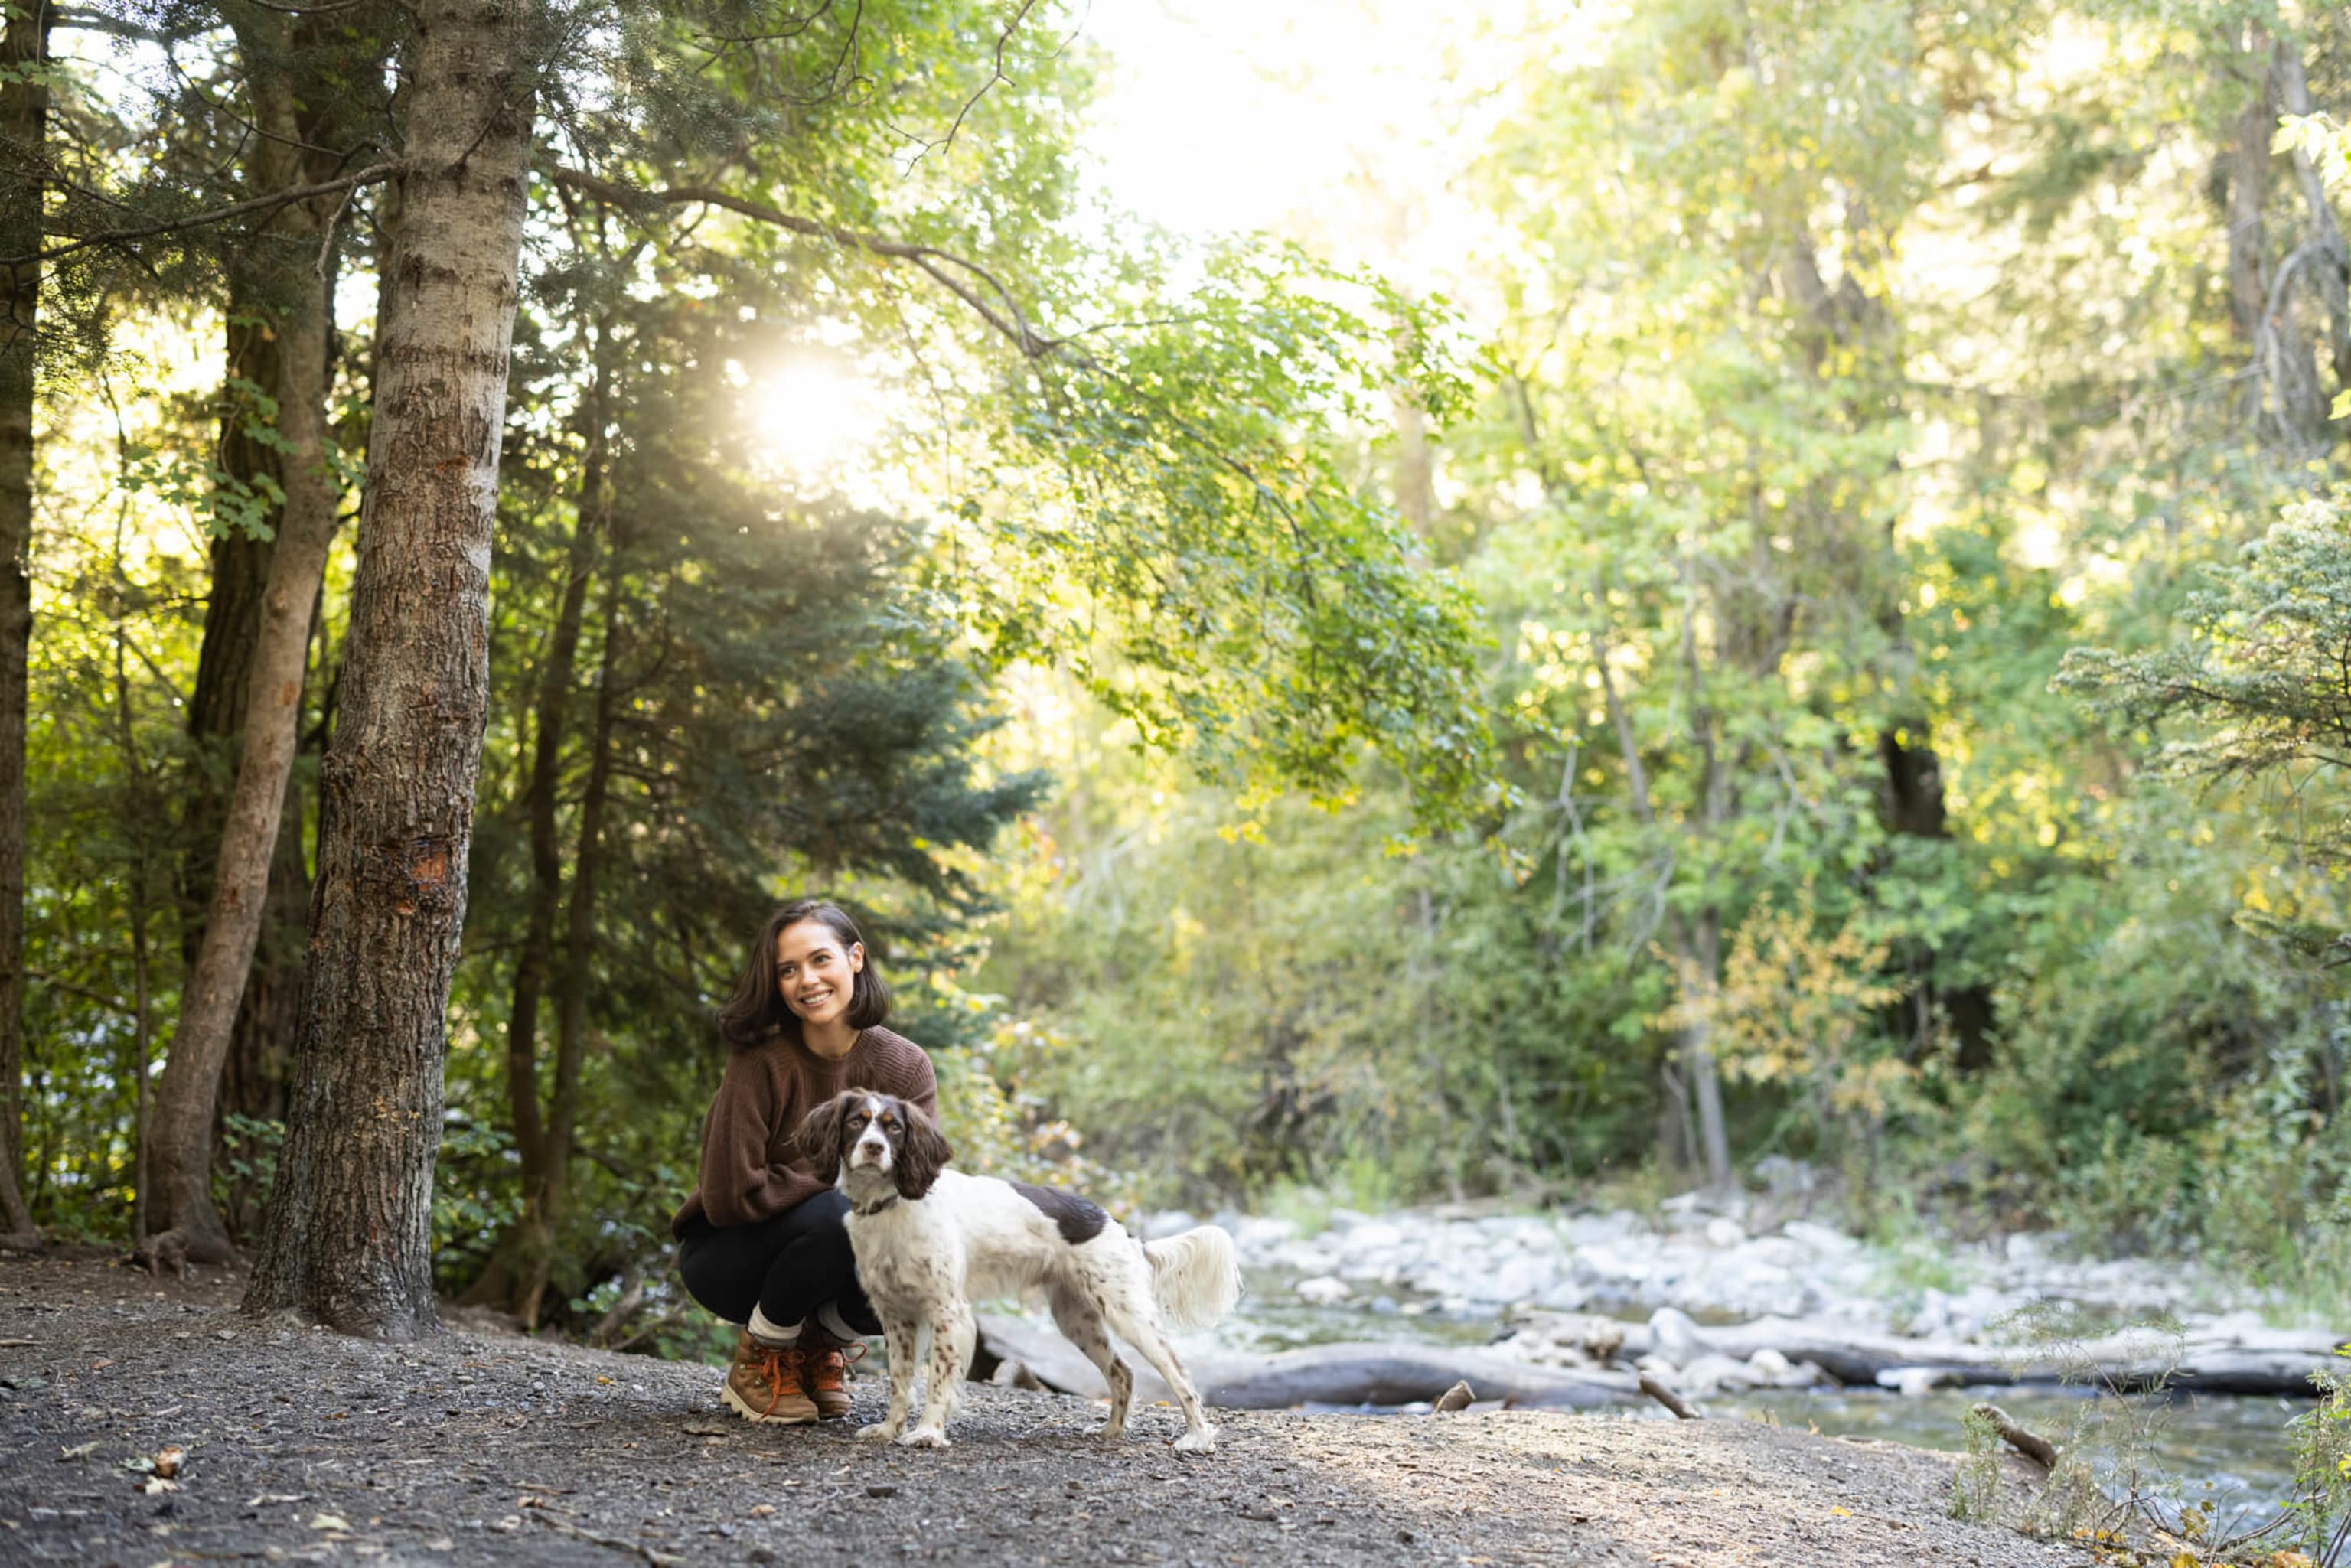 Woman kneeling with dog in woods